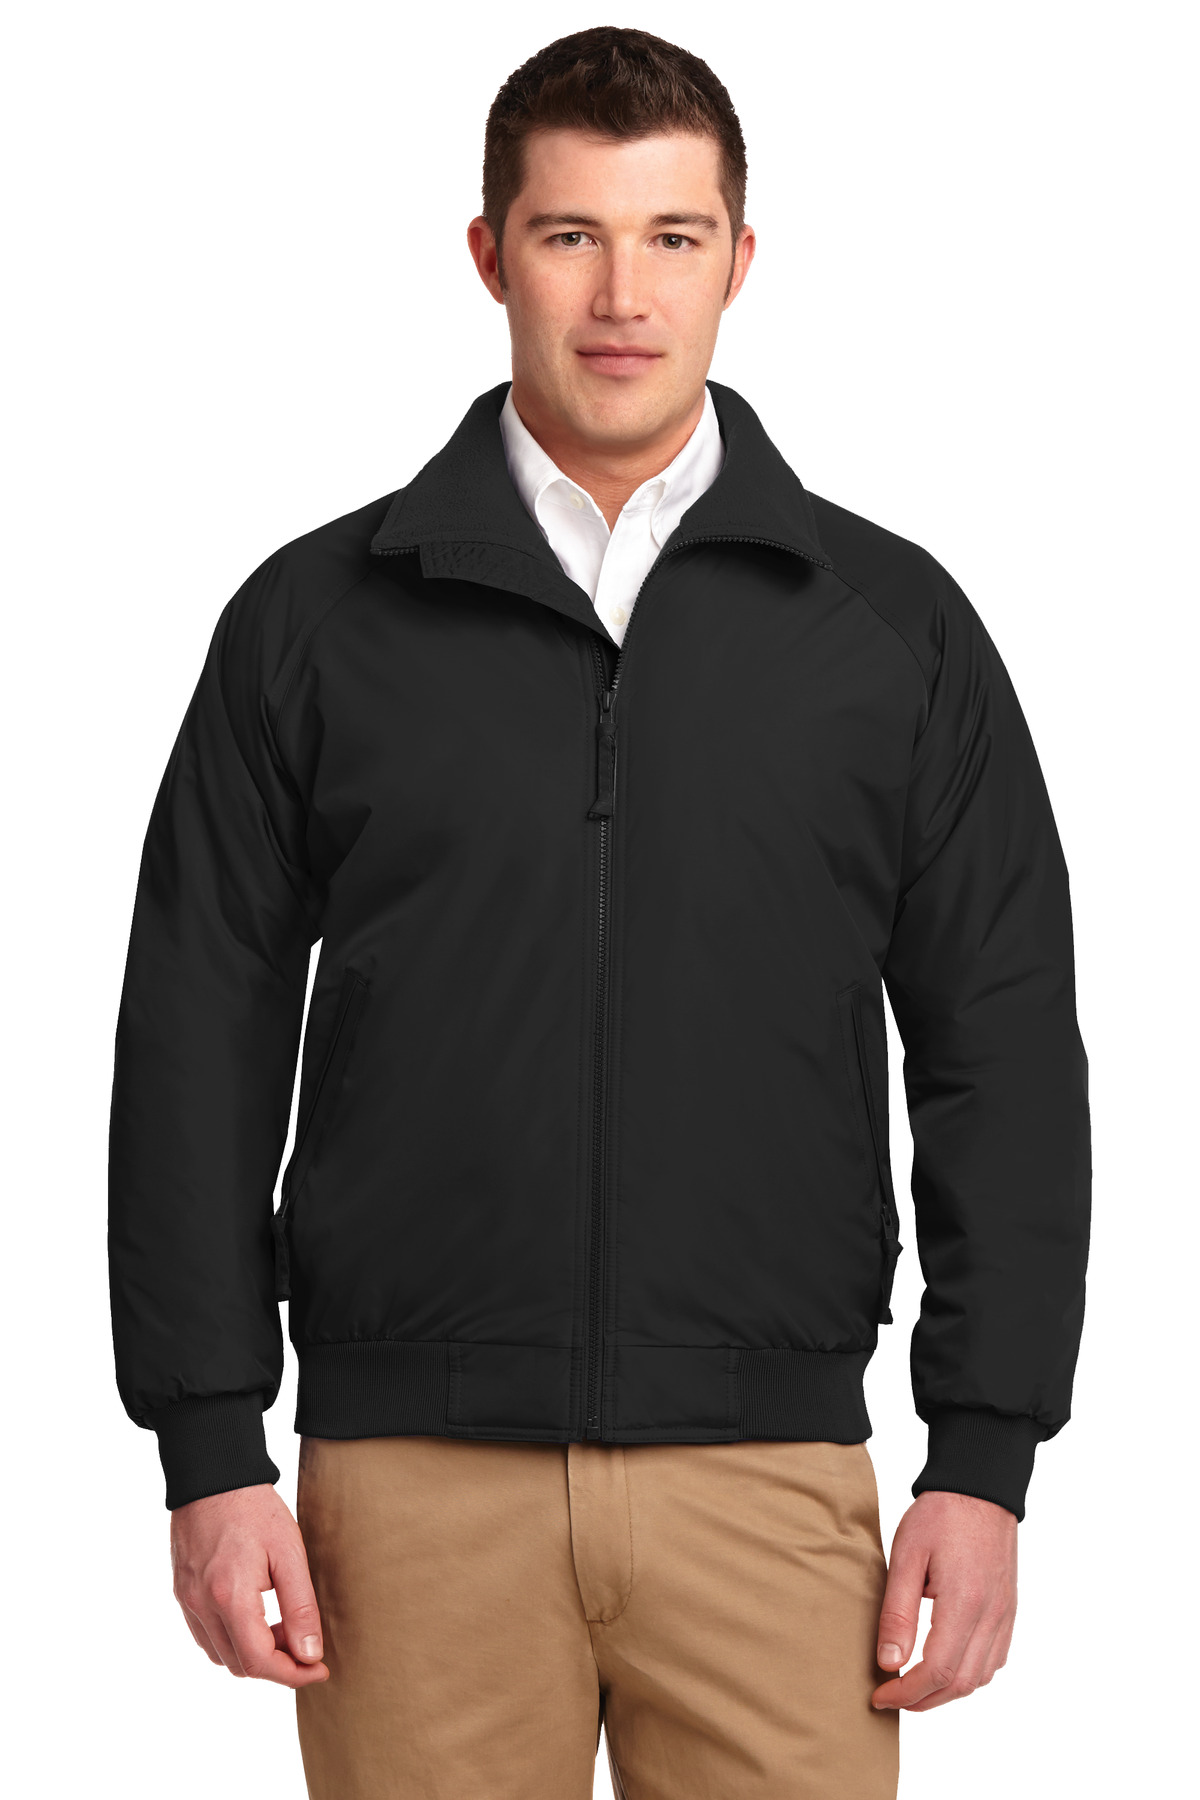 Port Authority Hospitality Tall Outerwear ® Tall Challenger Jacket.-Port Authority